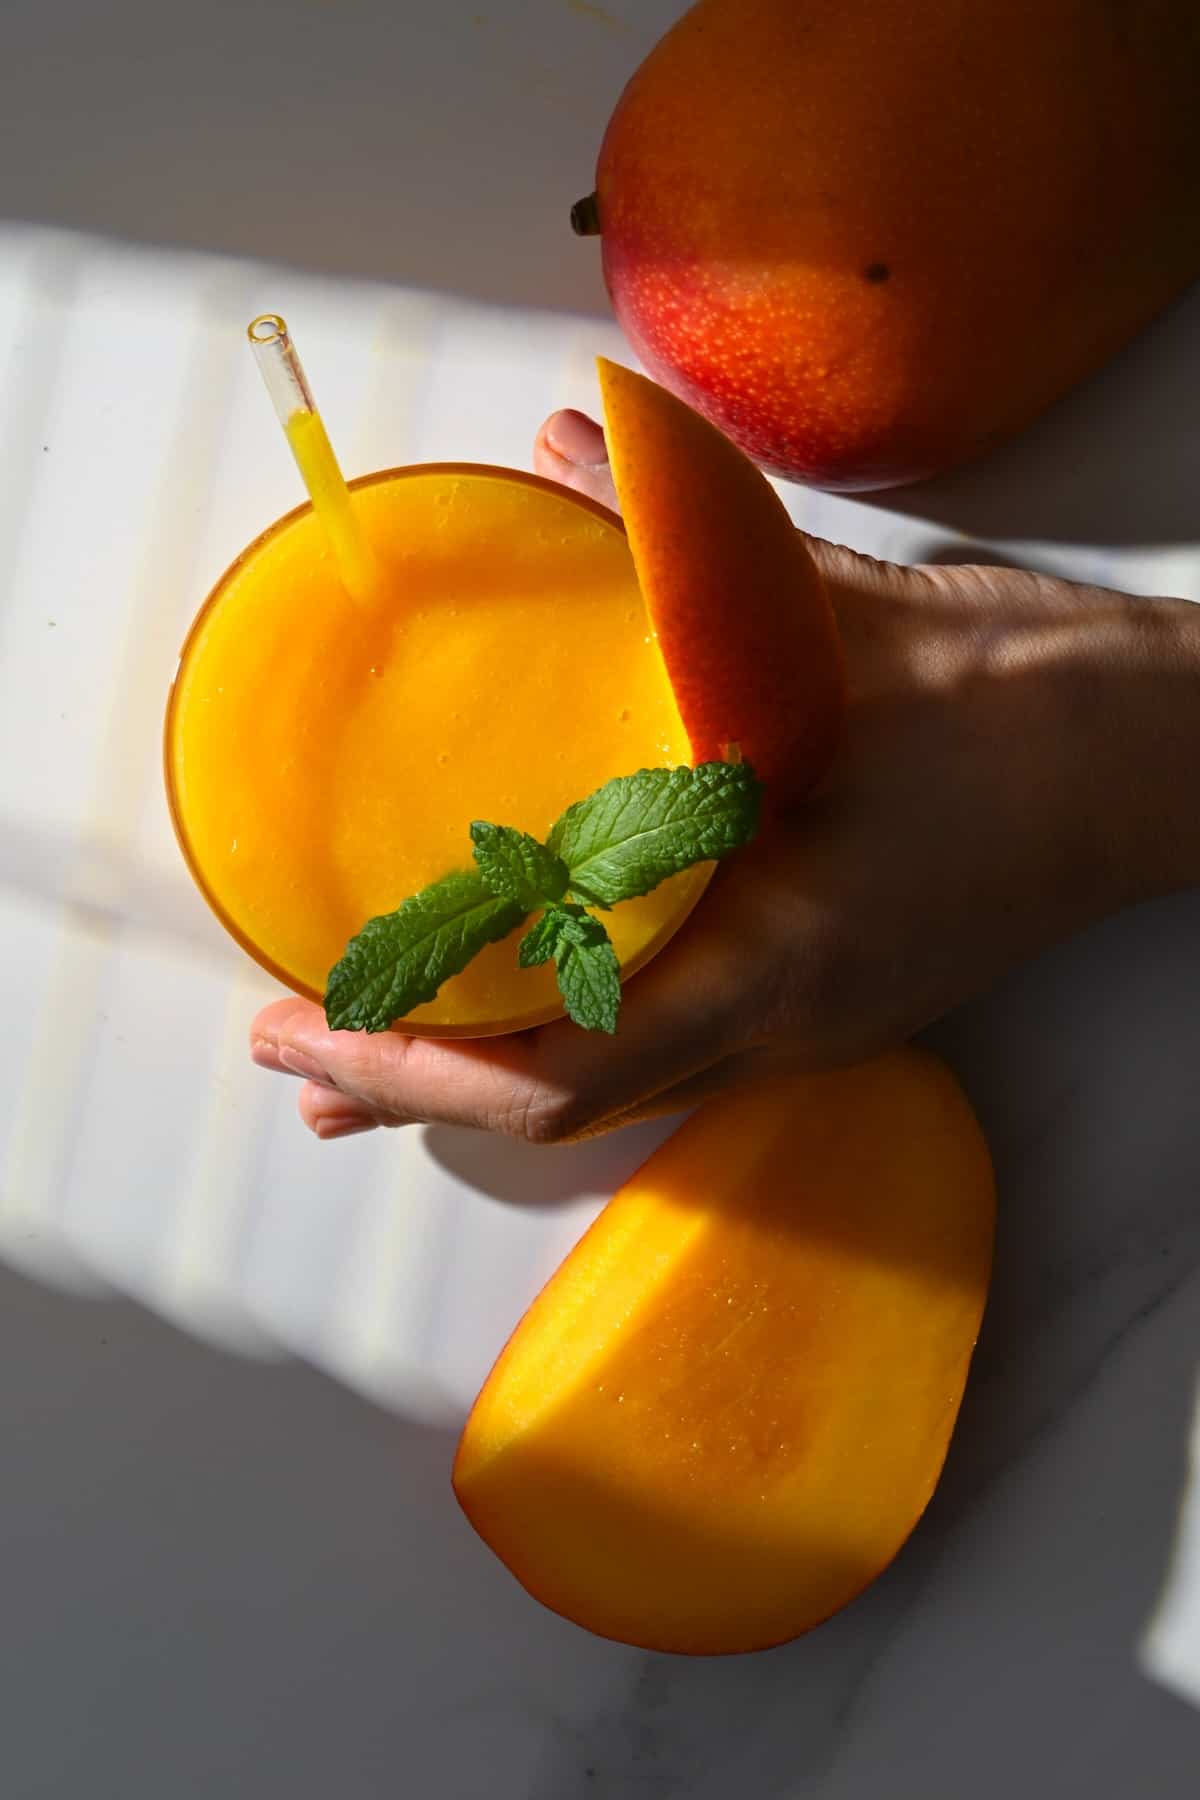 Hand holding a glass with mango juice on a flat surface